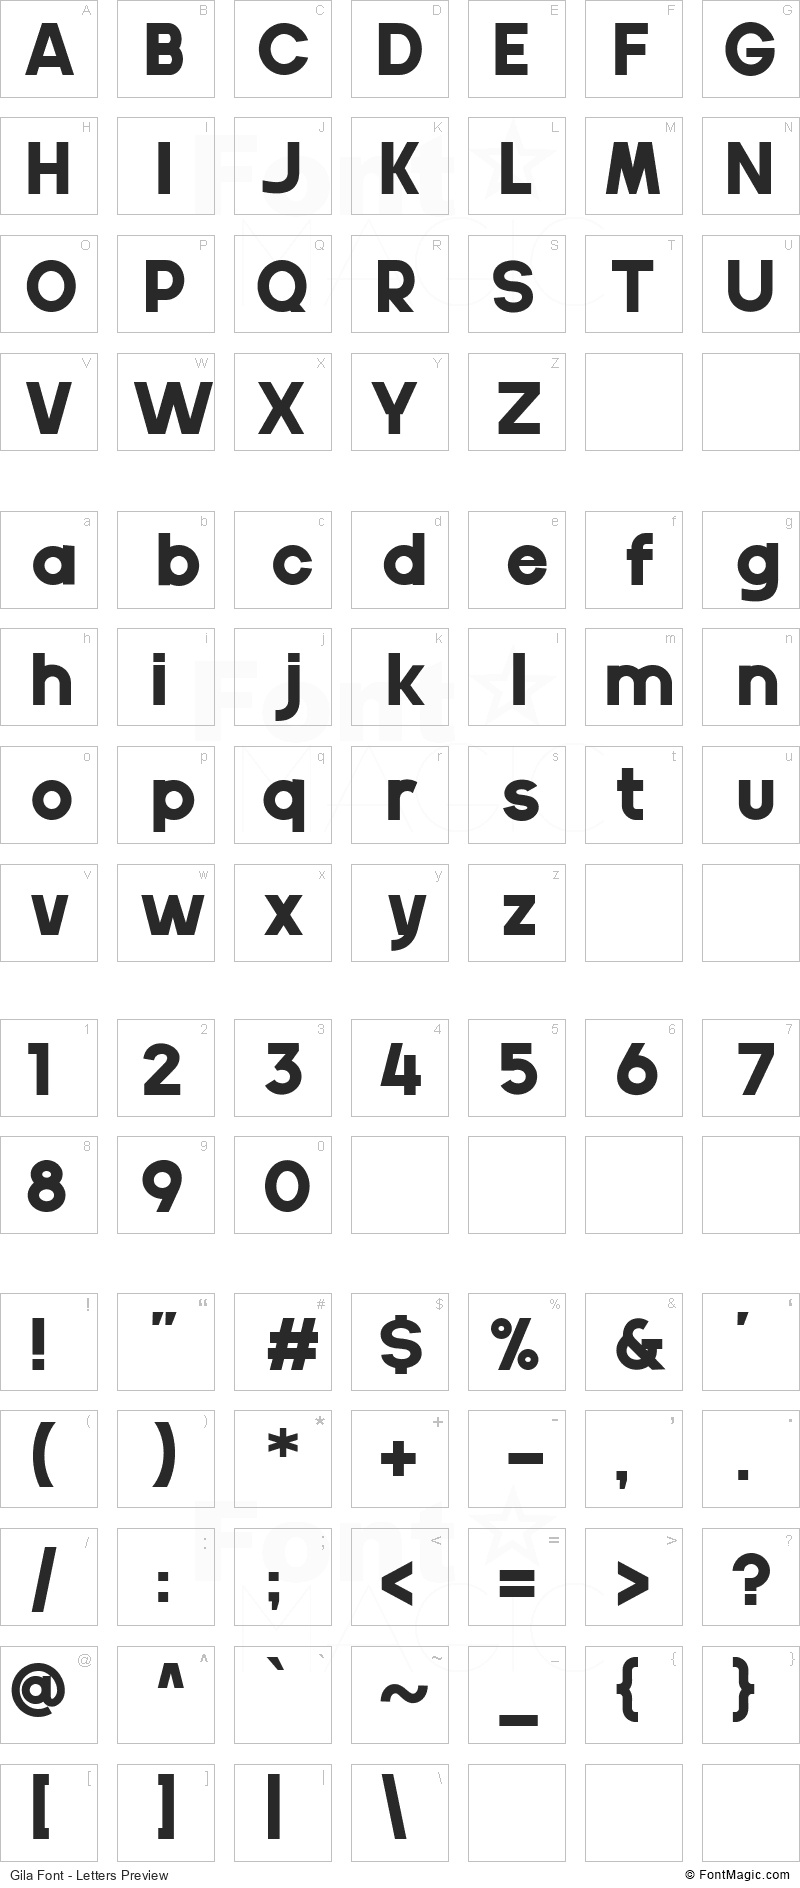 Gila Font - All Latters Preview Chart